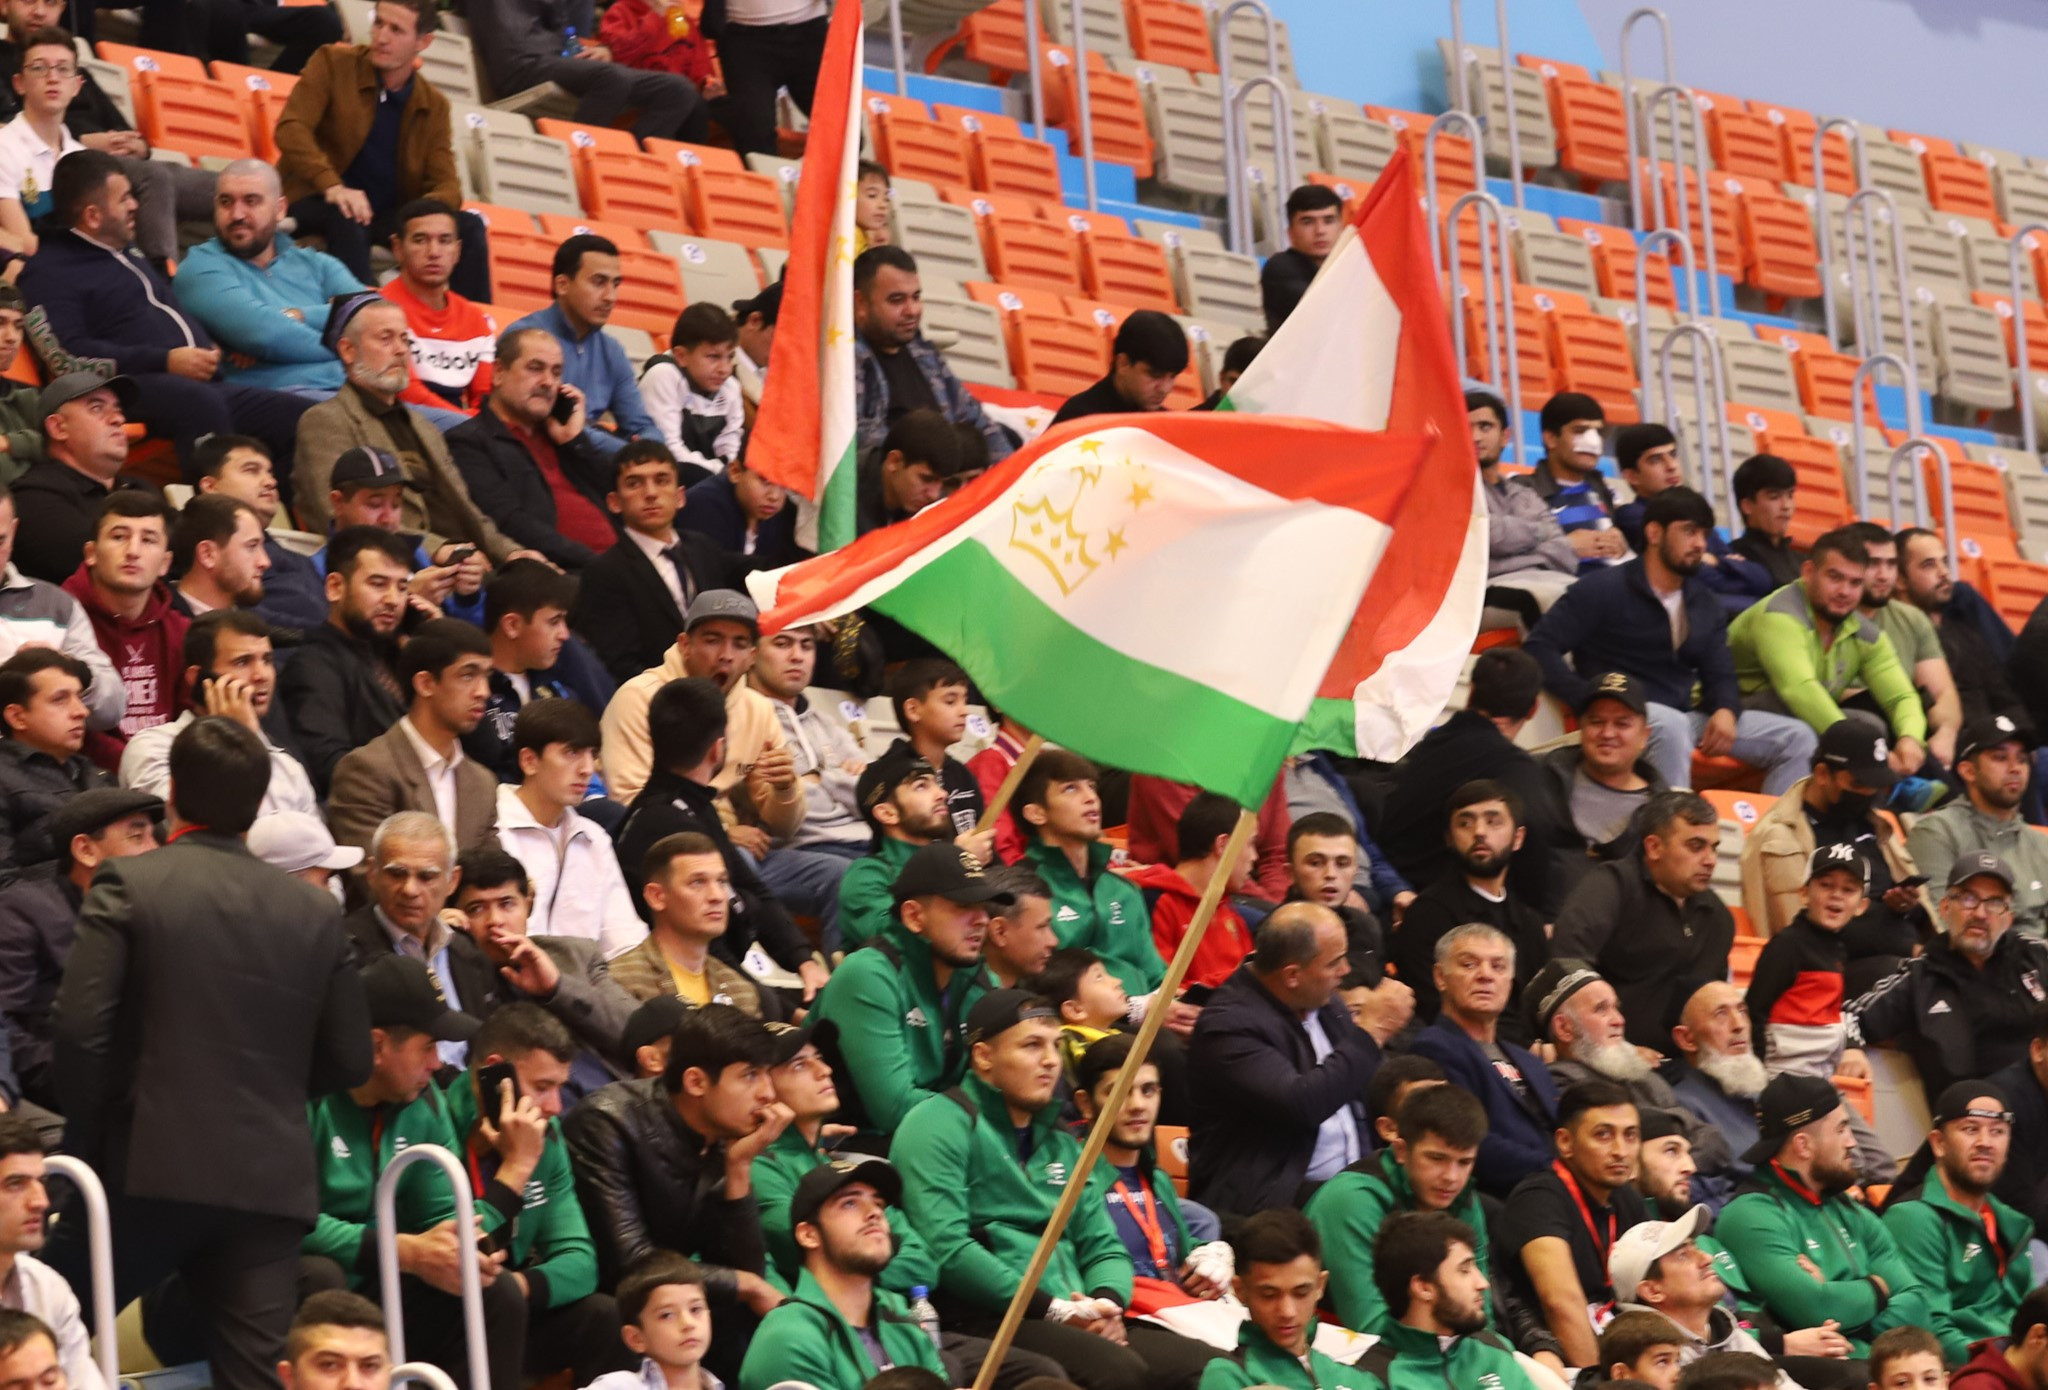 Tajikistan is represented by 11 athletes in the IMMAF Asian Championships finals ©IMMAF